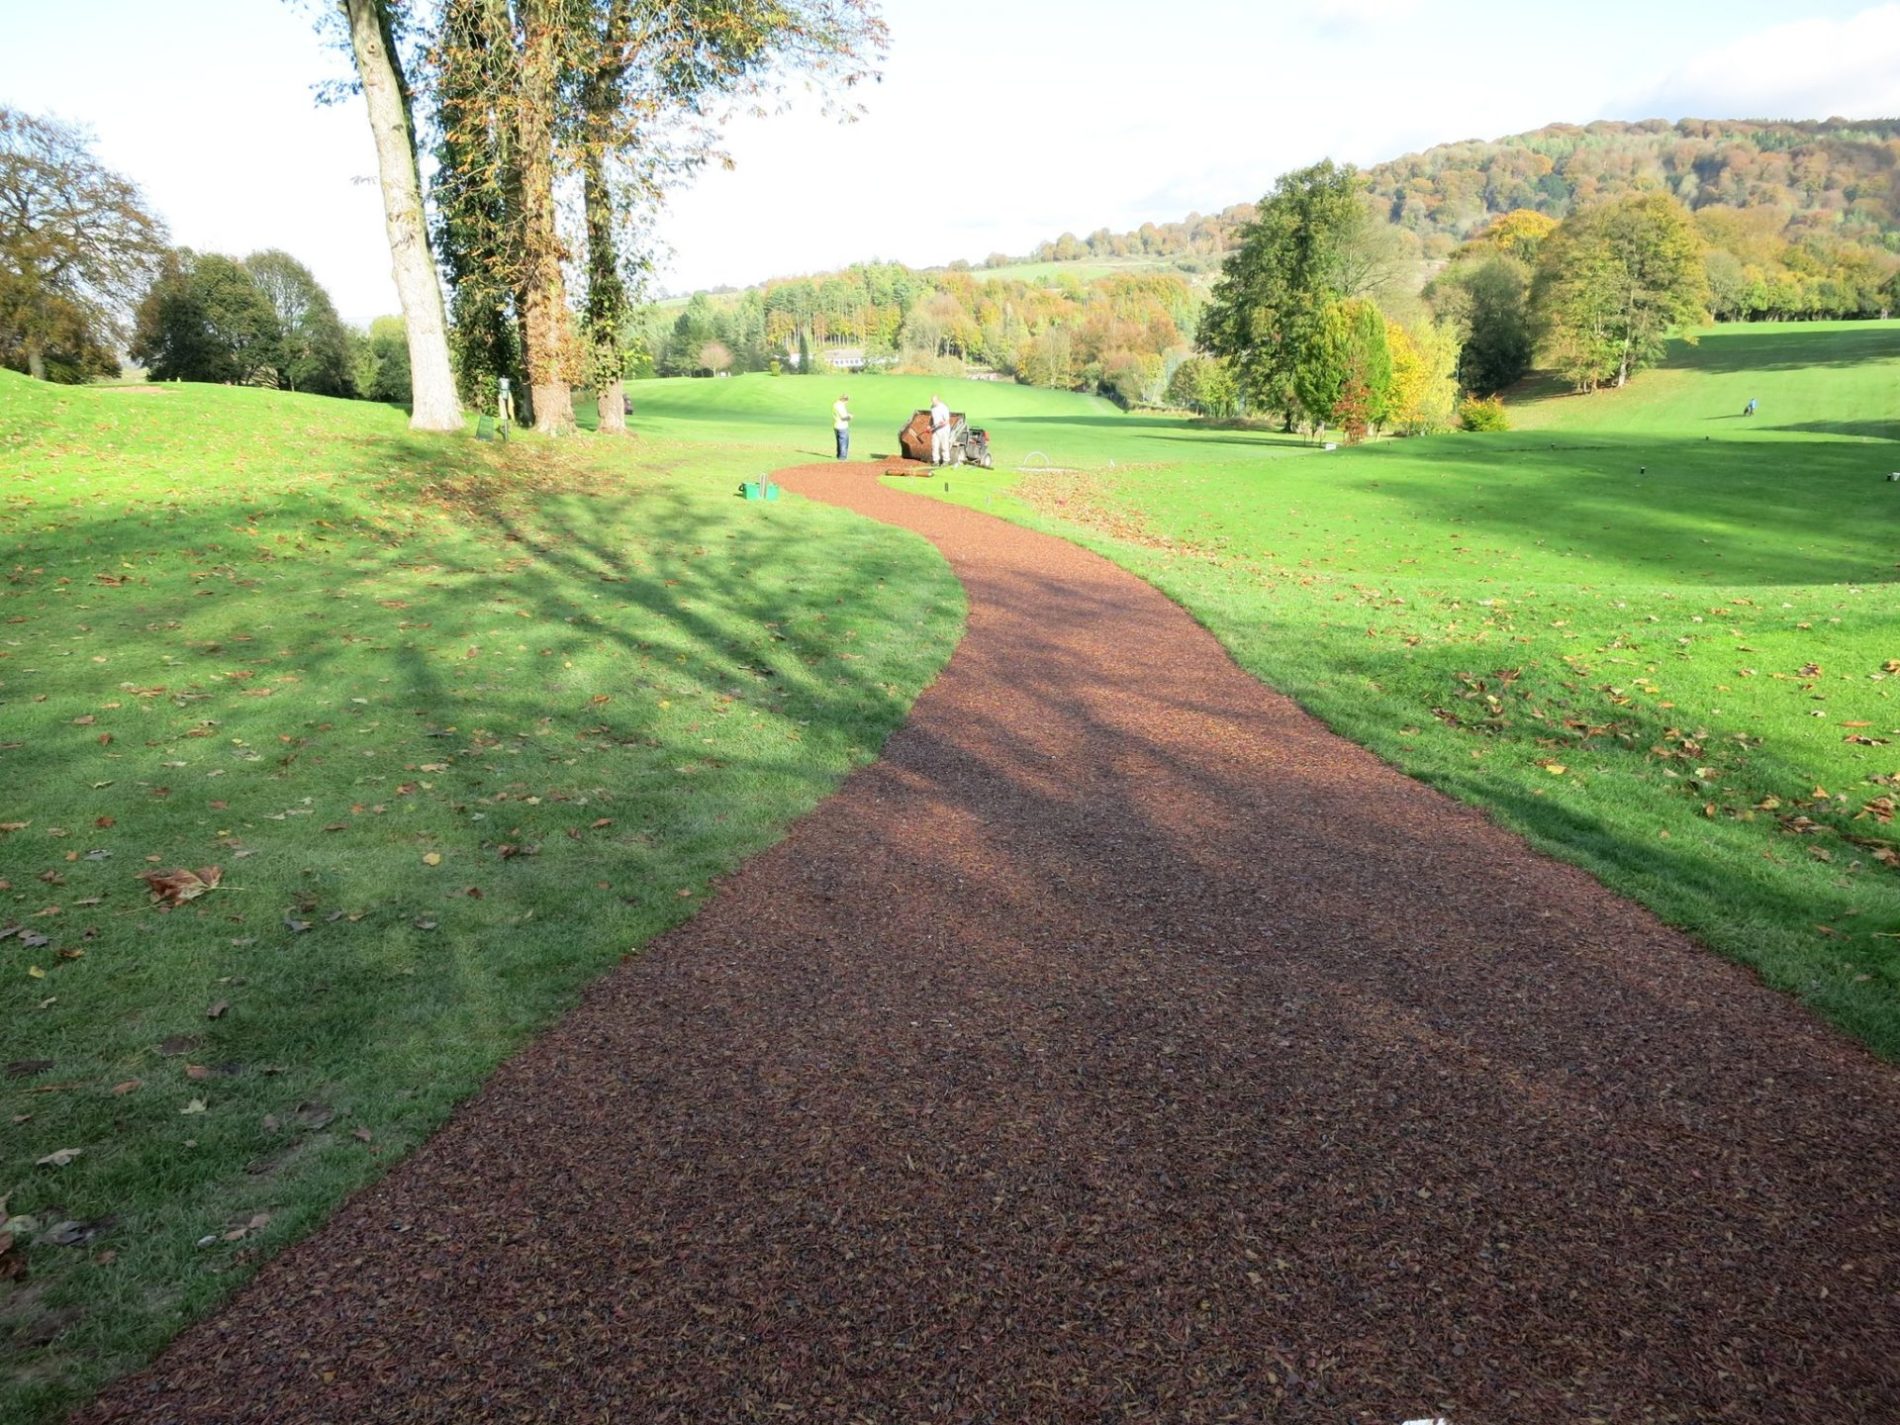 Bonded Rubber Mulch Paths